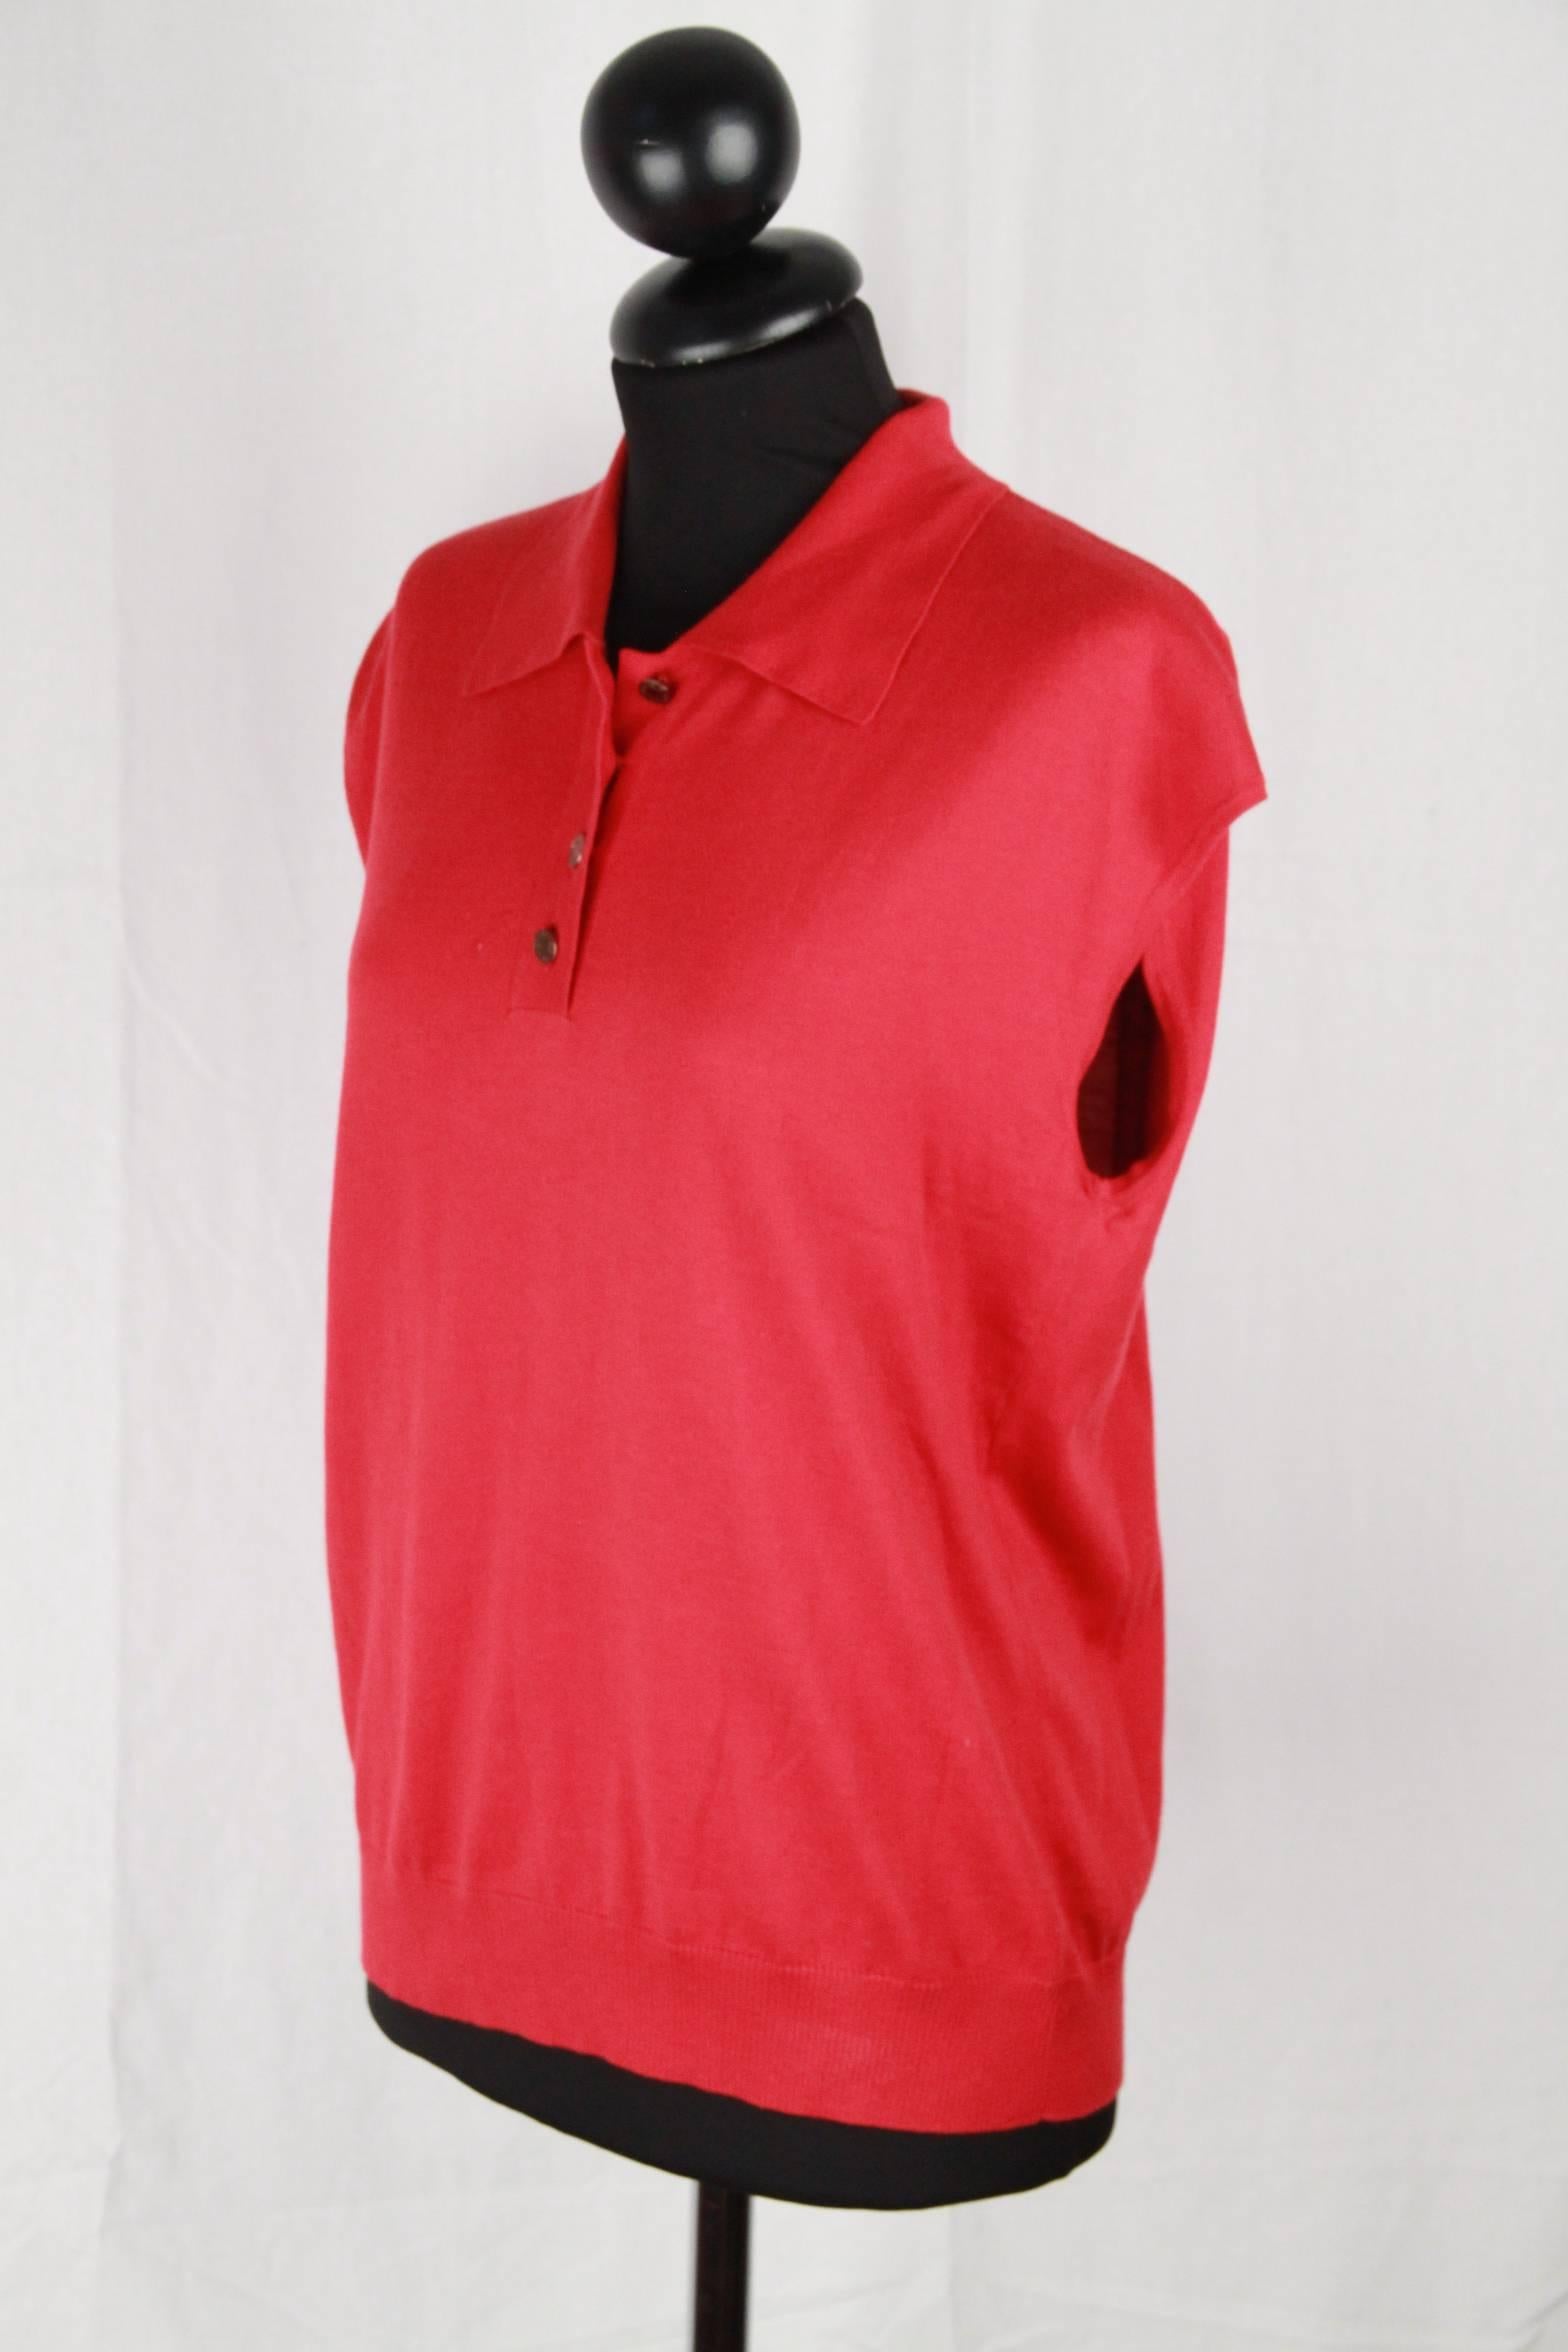 - Cotton polo shirt by HERMES
- Red color
- Cap sleeves

Logos / Tags: 'HERMES Paris - Made in Italy' tag, size tag (38 FR), composition tag, designer's buttons